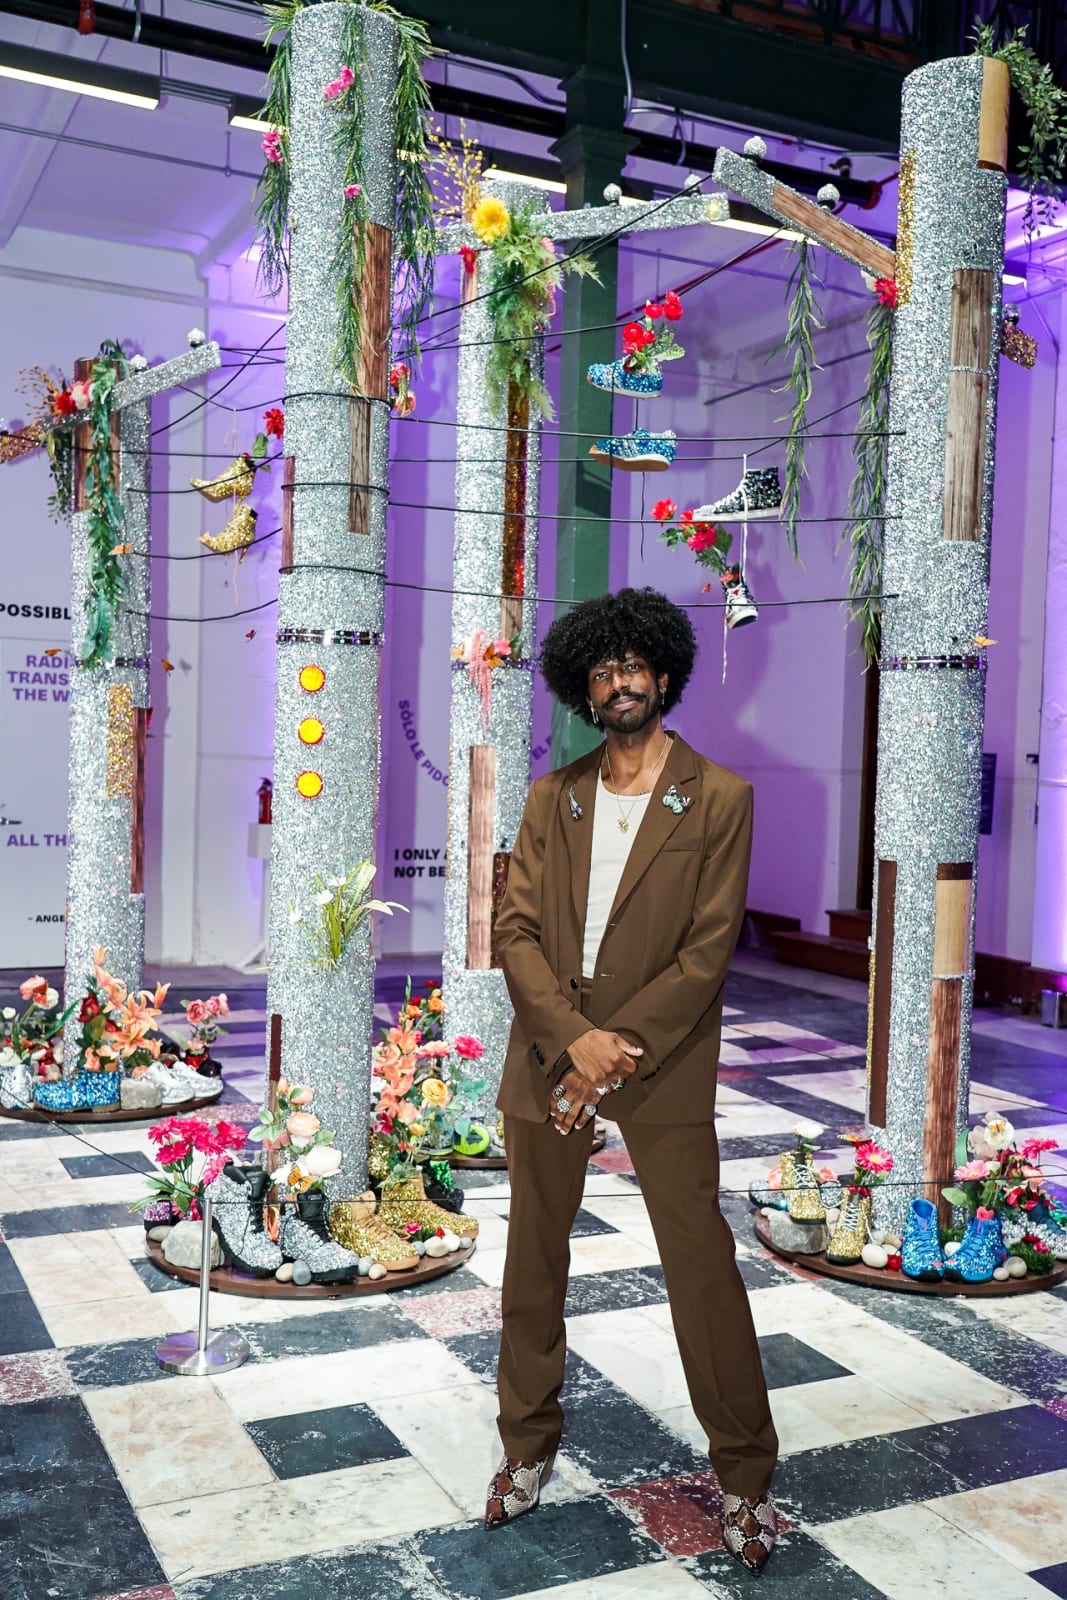 Devan Shimoyama with The Grove at Smithsonian Arts + Industries Building, Courtesy FotoBriceno.